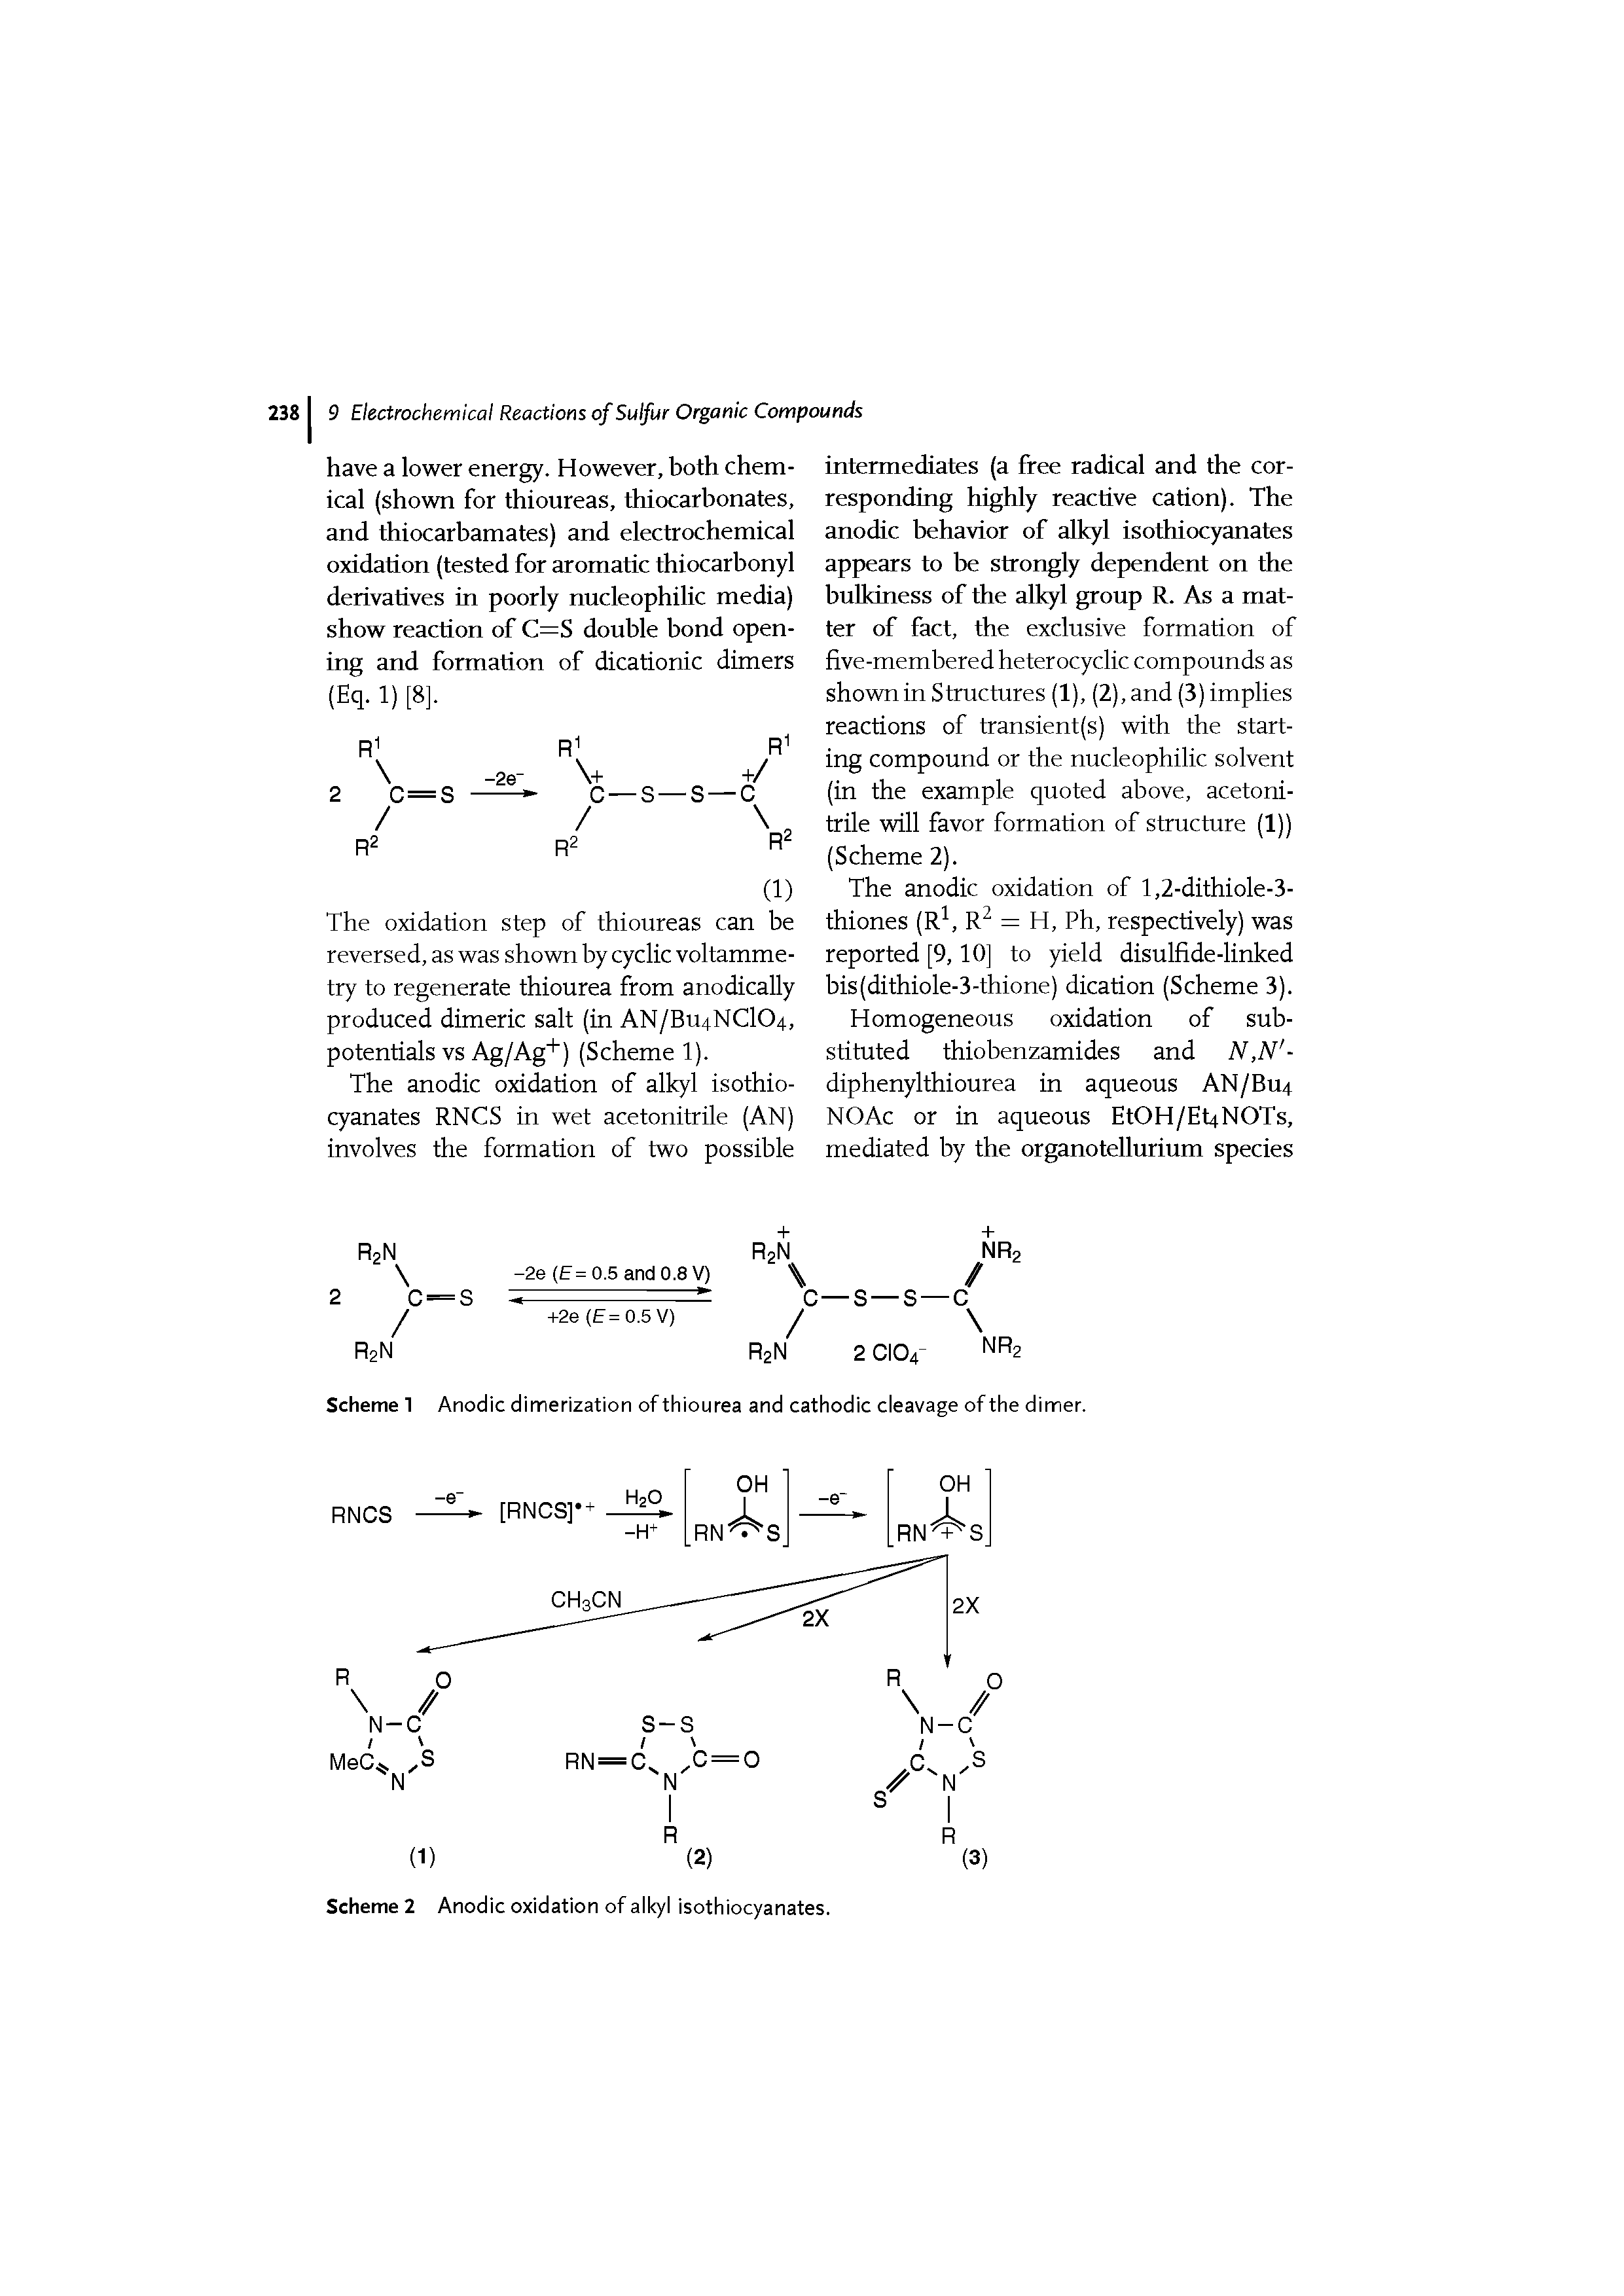 Scheme 1 Anodic dimerization of thiourea and cathodic cleavage of the dimer.